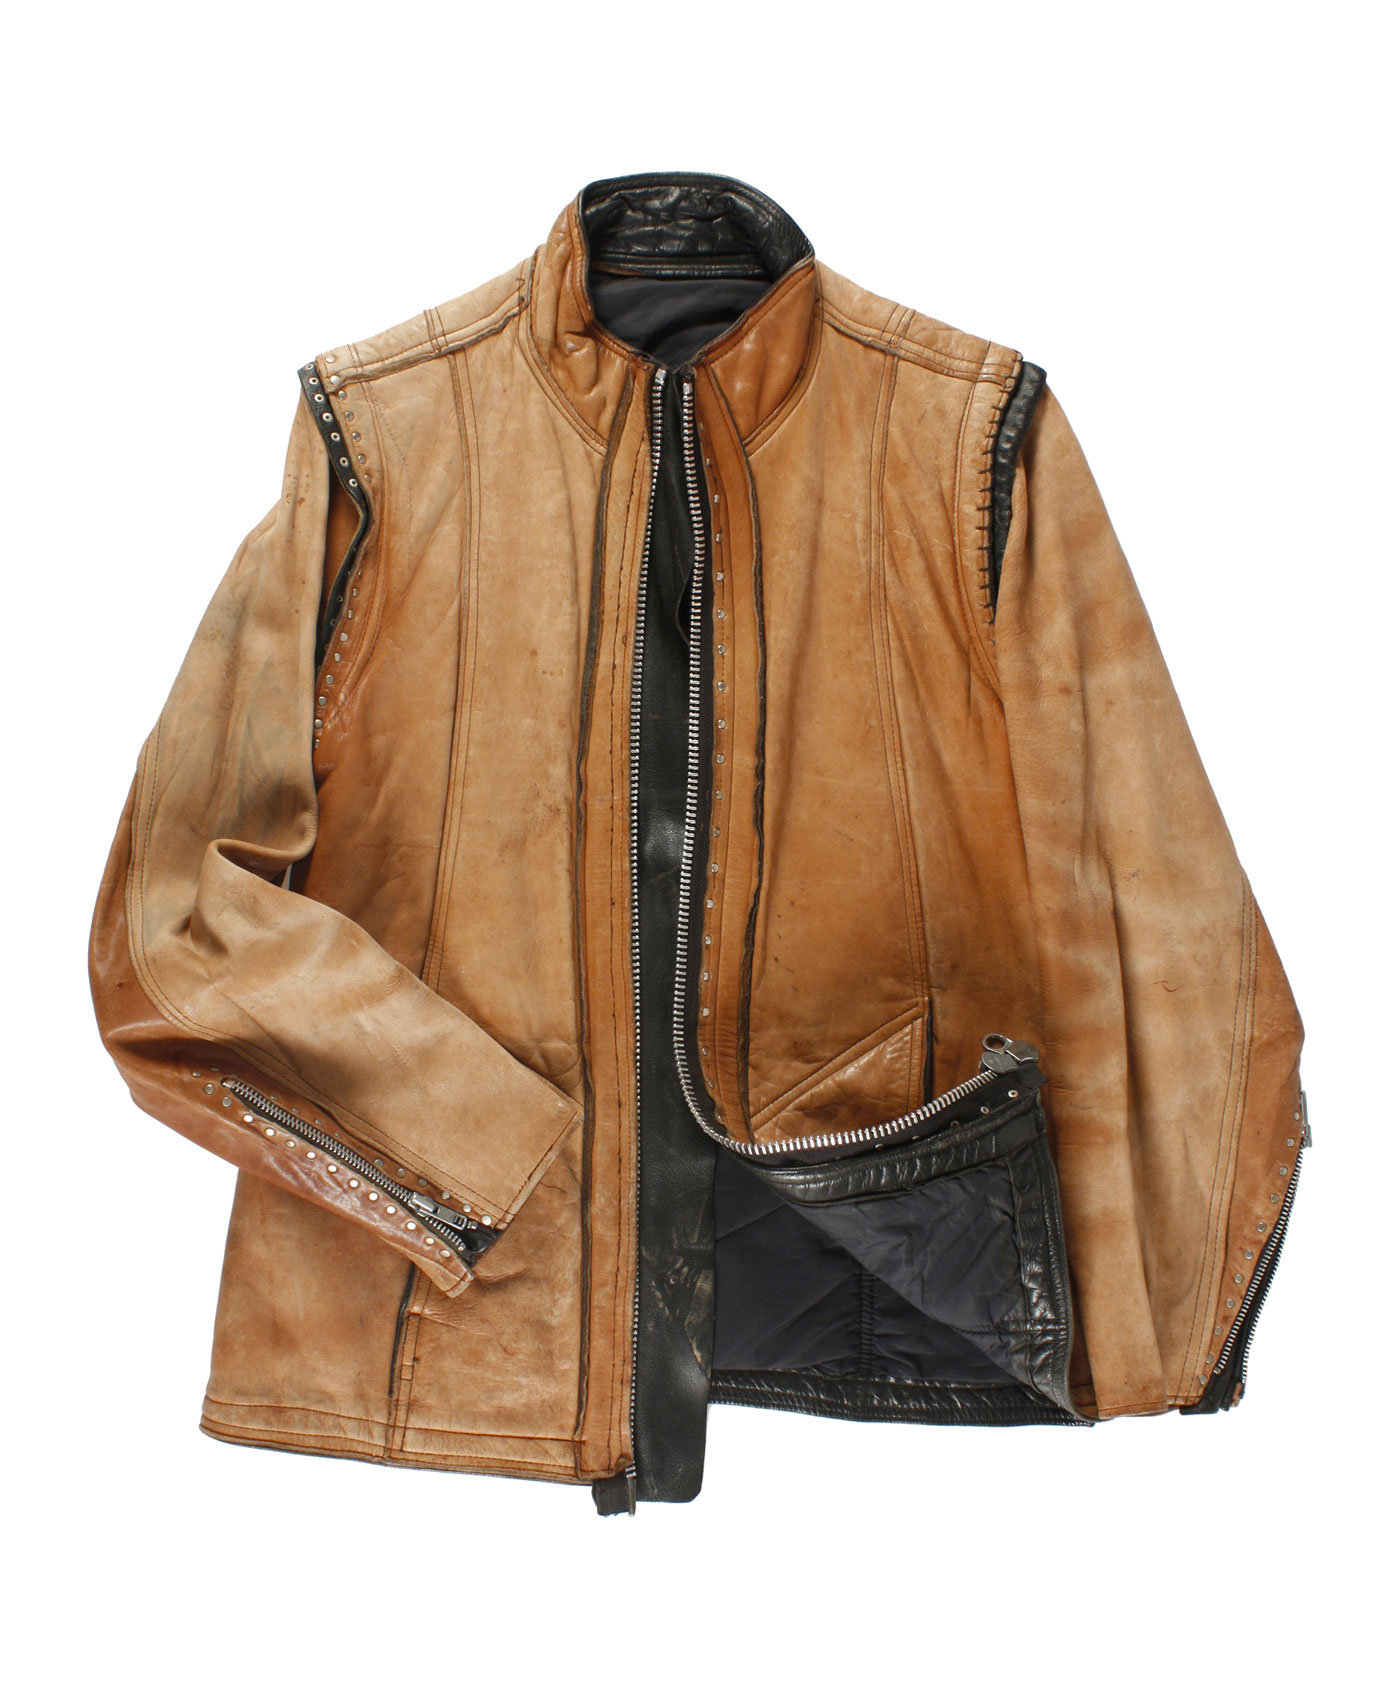 Leather Woman jacket 70s